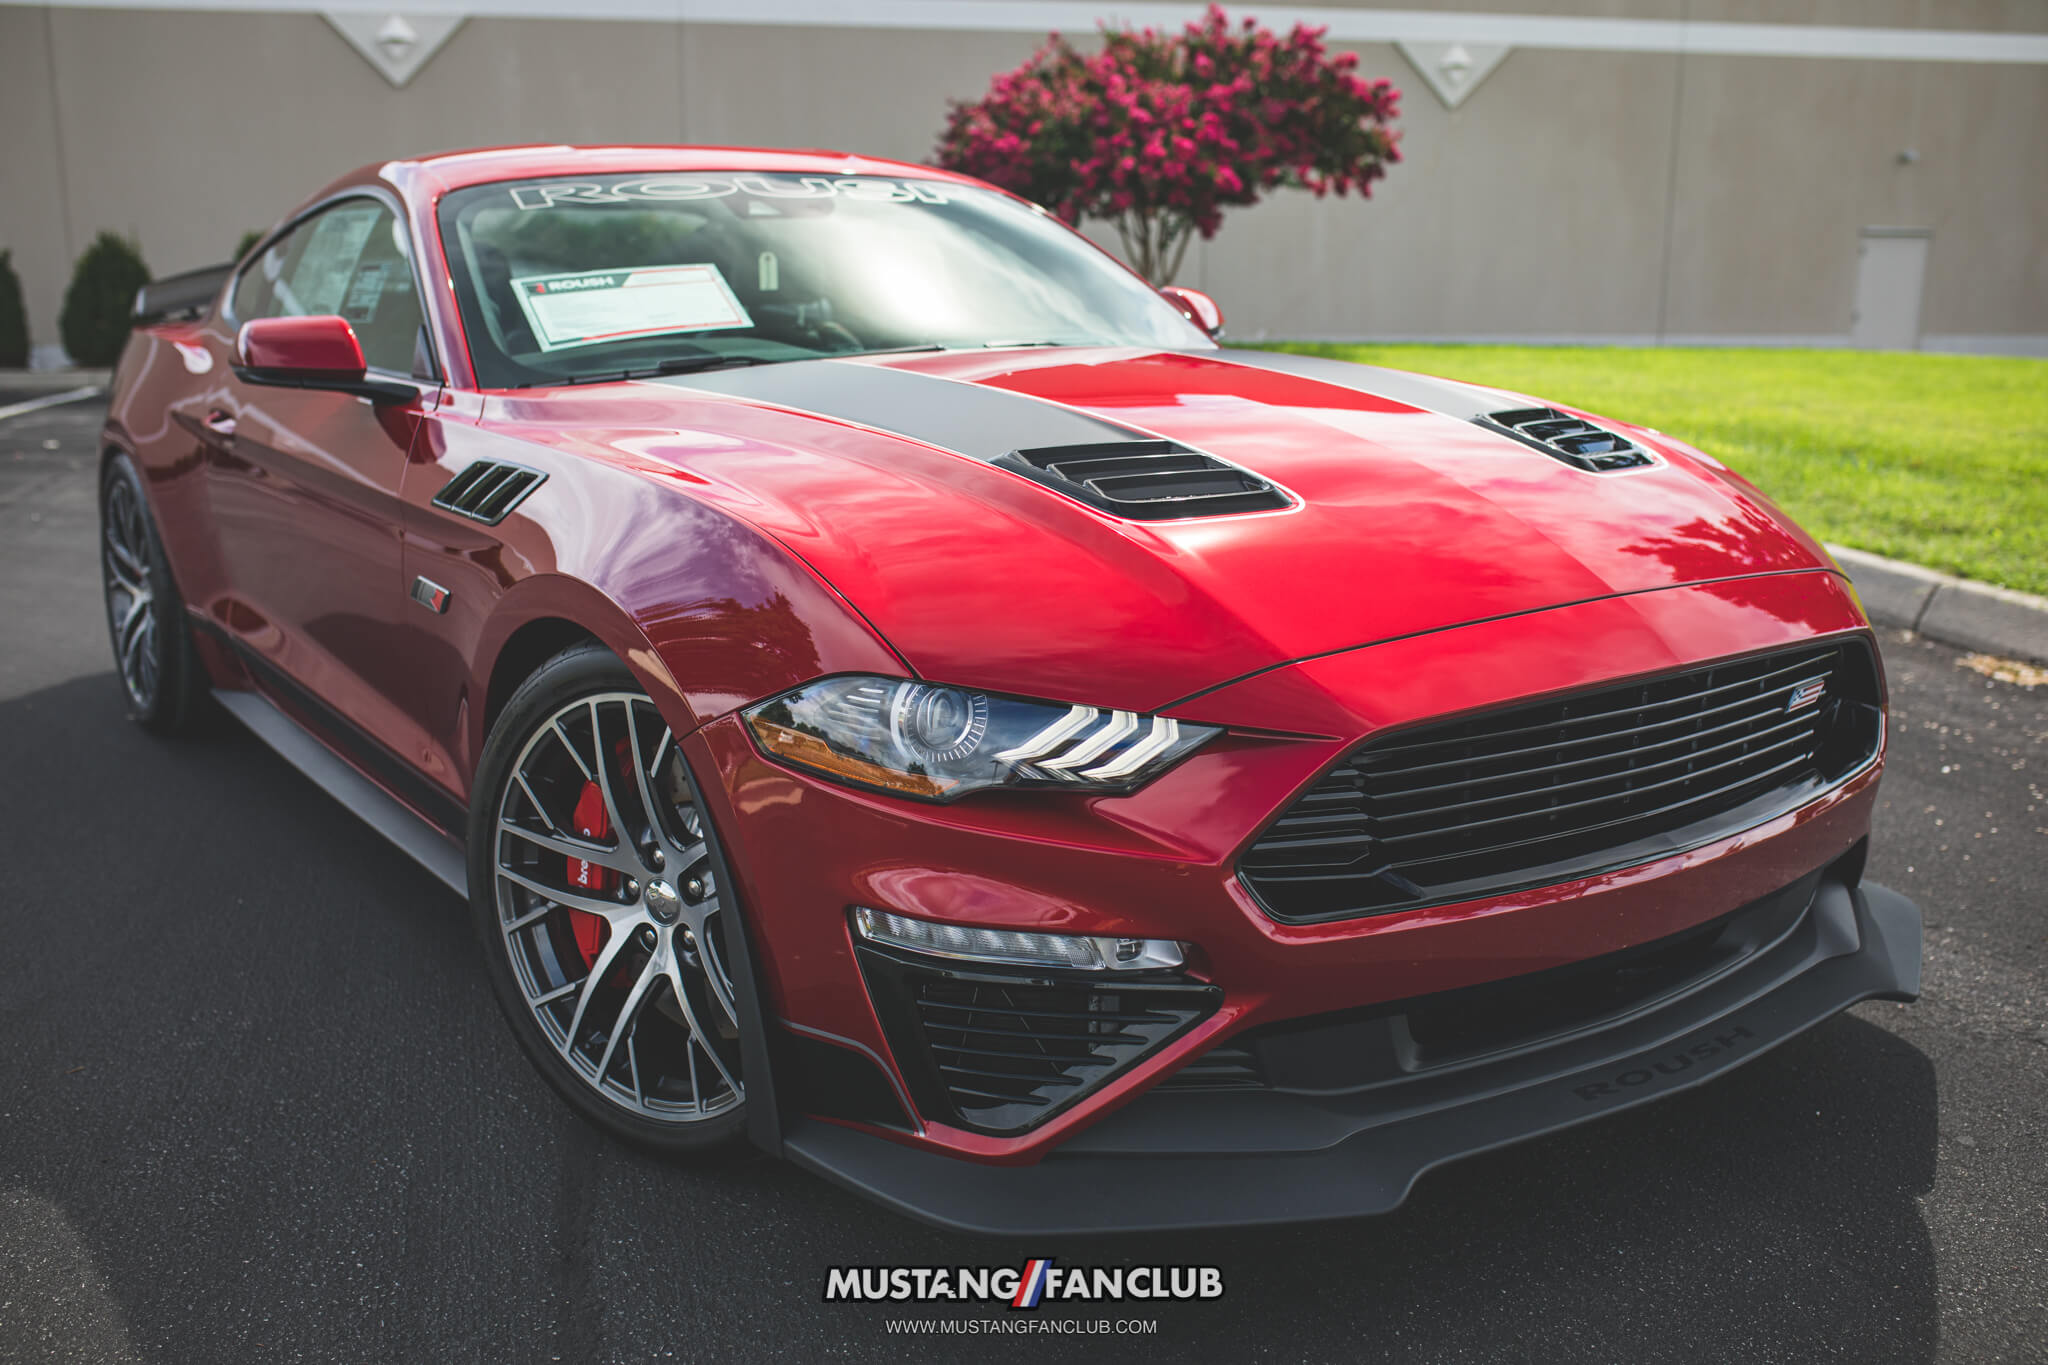 01 of 60 | Jack Roush Edition Mustang